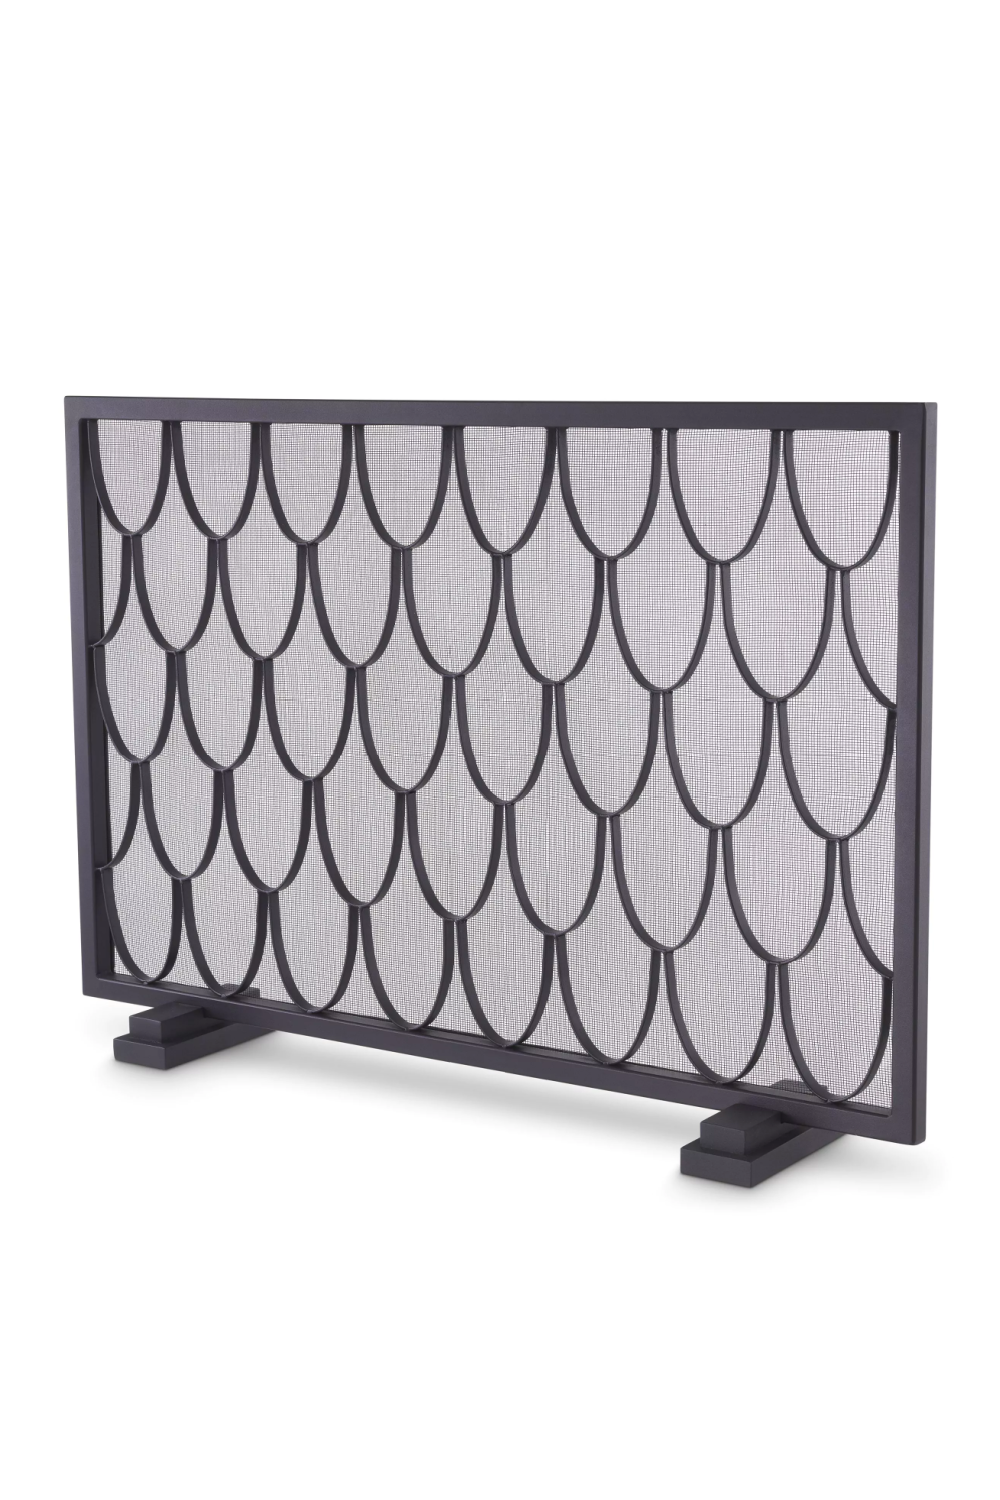 Scale Patterned Fire Screen | Eichholtz Valois | OROA.com